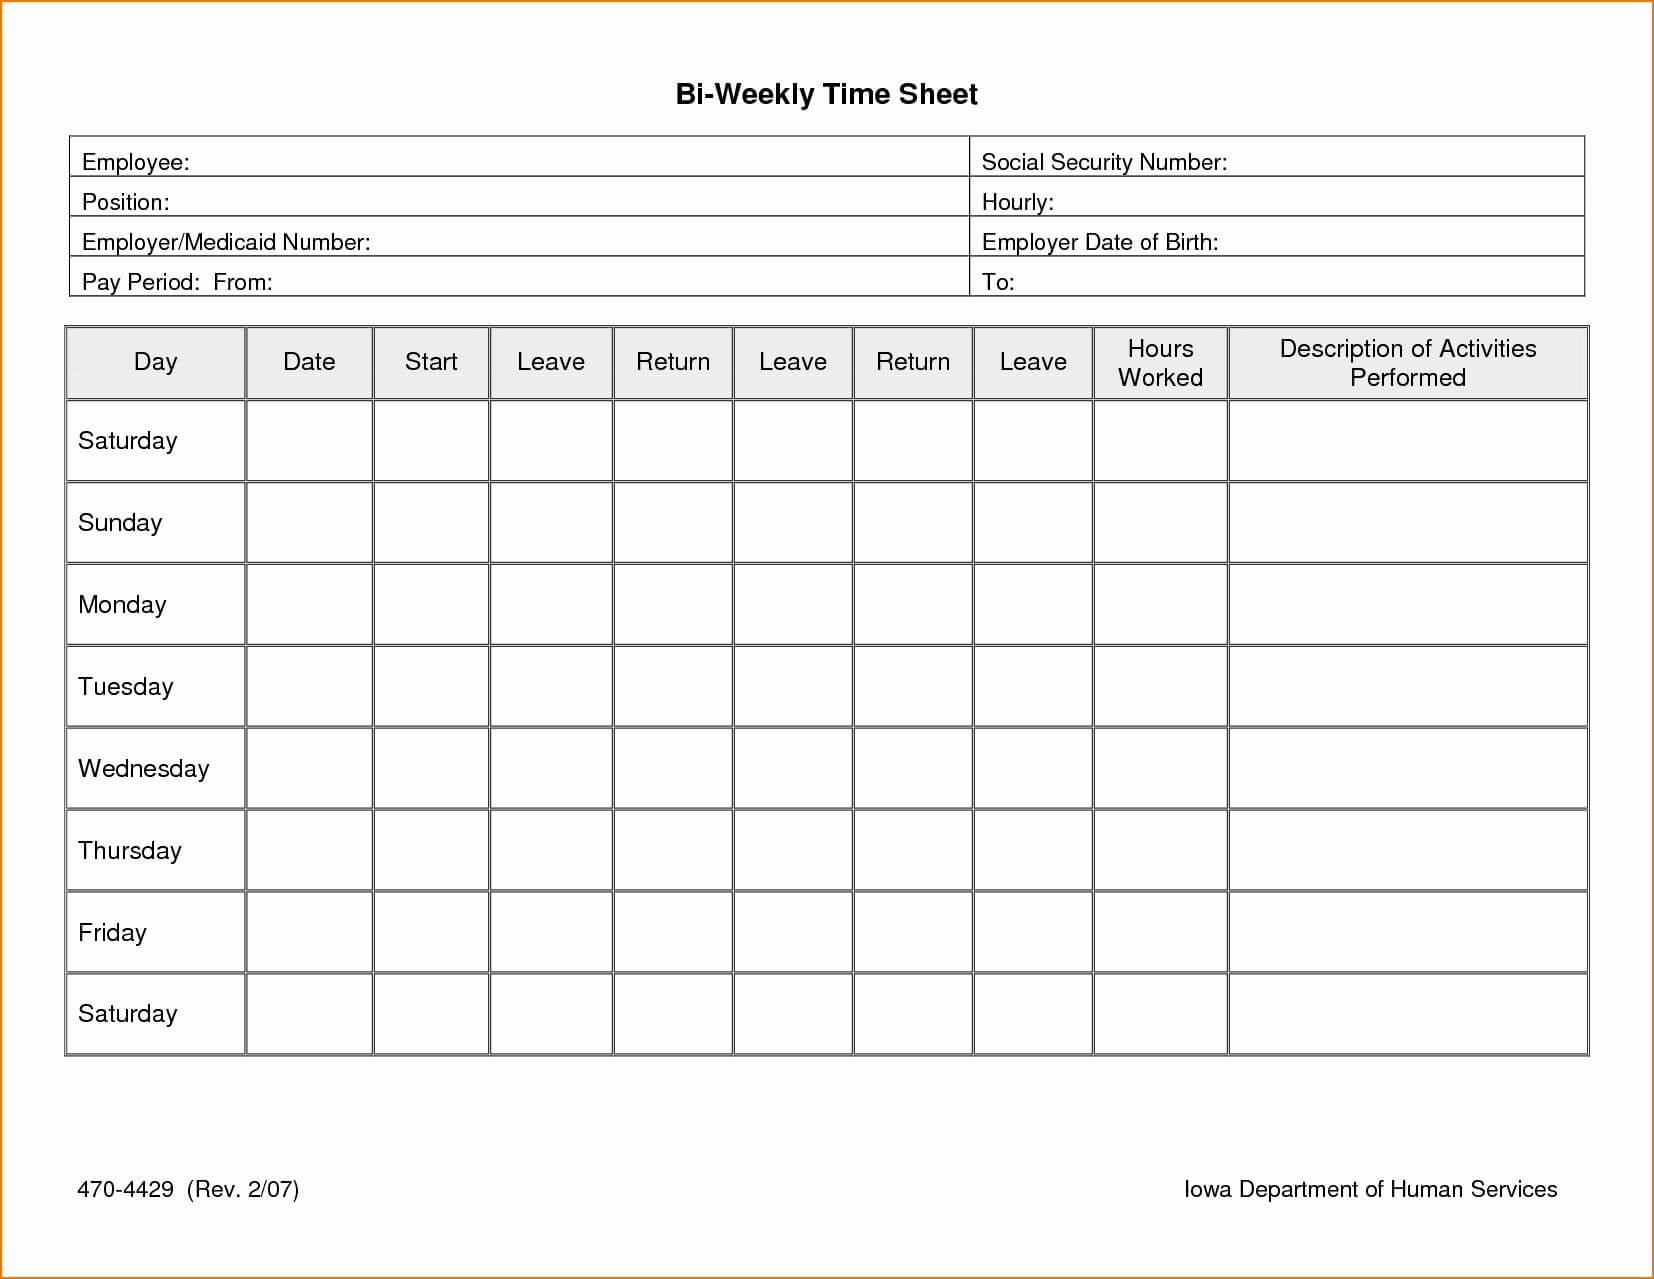 009 Time Card Template Free Excel 1654X1279 Incredible Ideas Within Weekly Time Card Template Free